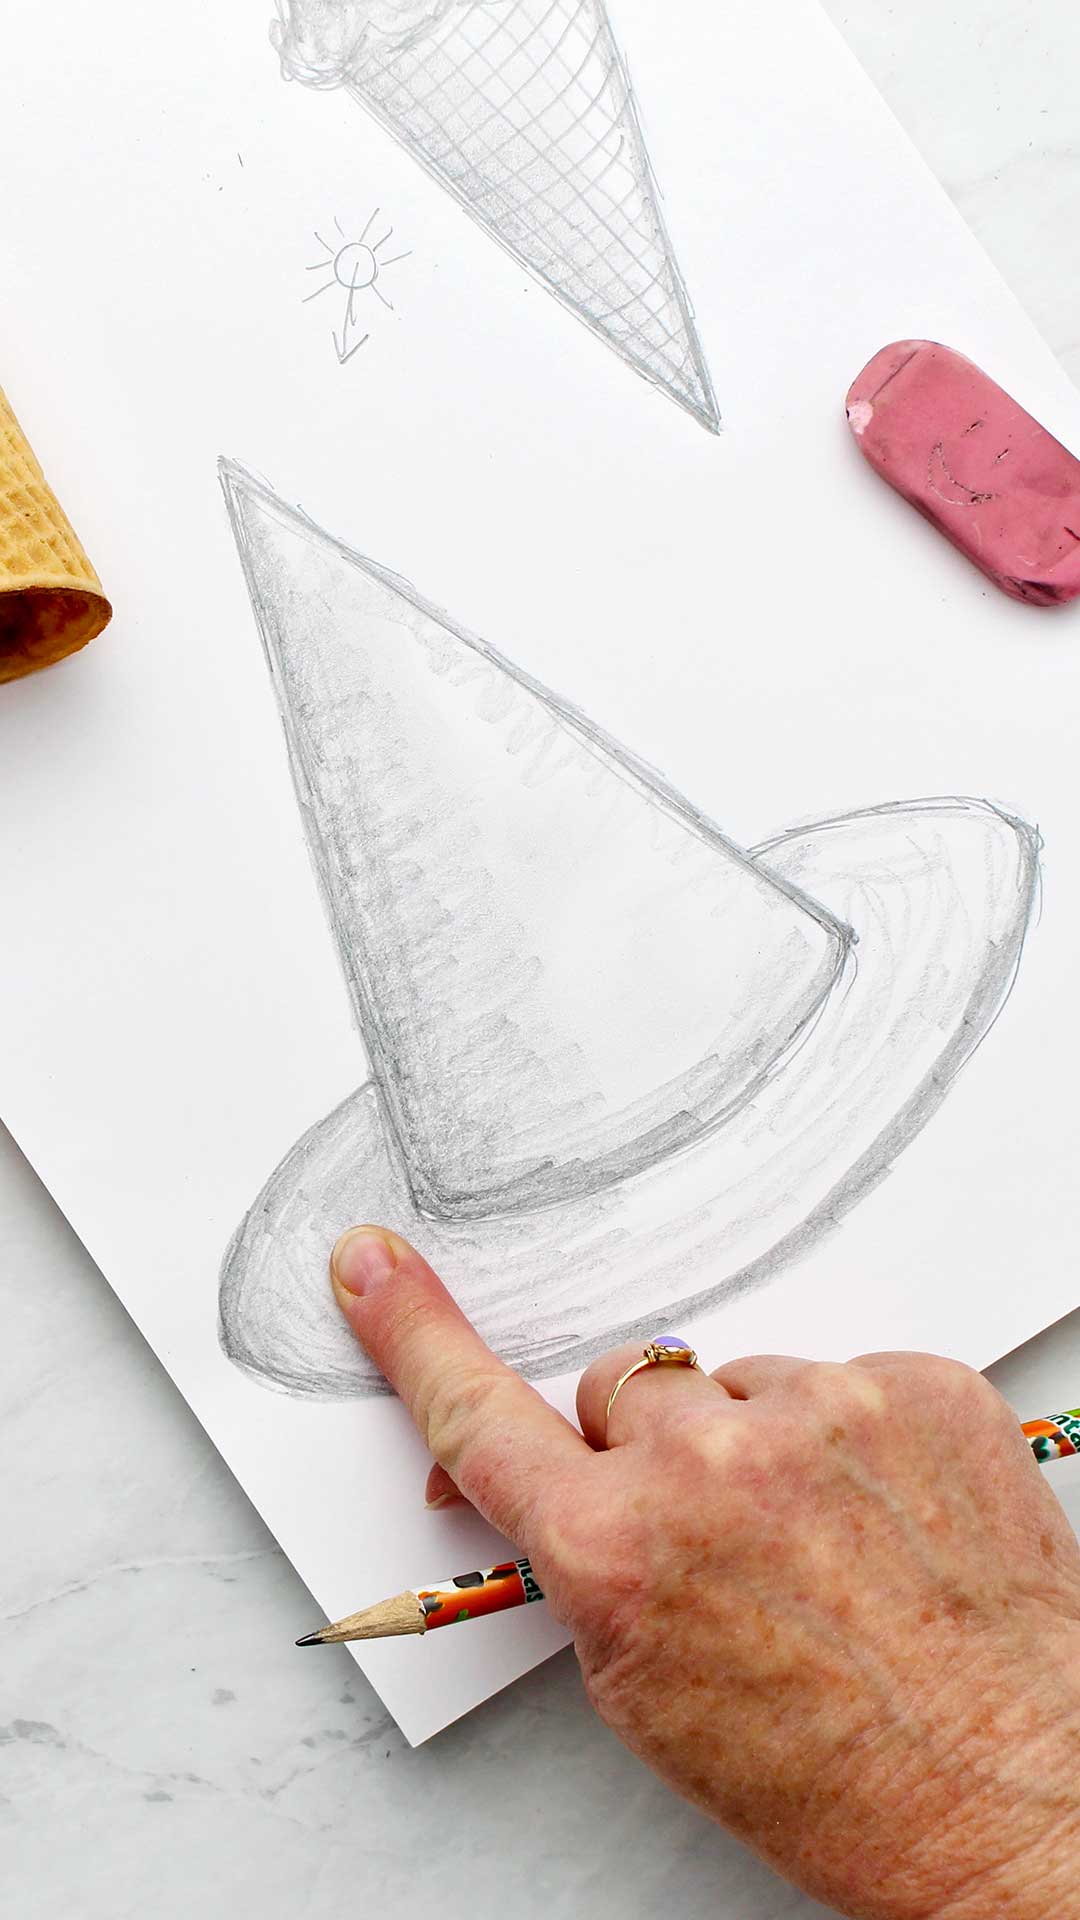 A finger blending the shading on a pencil drawing of a witches hat.